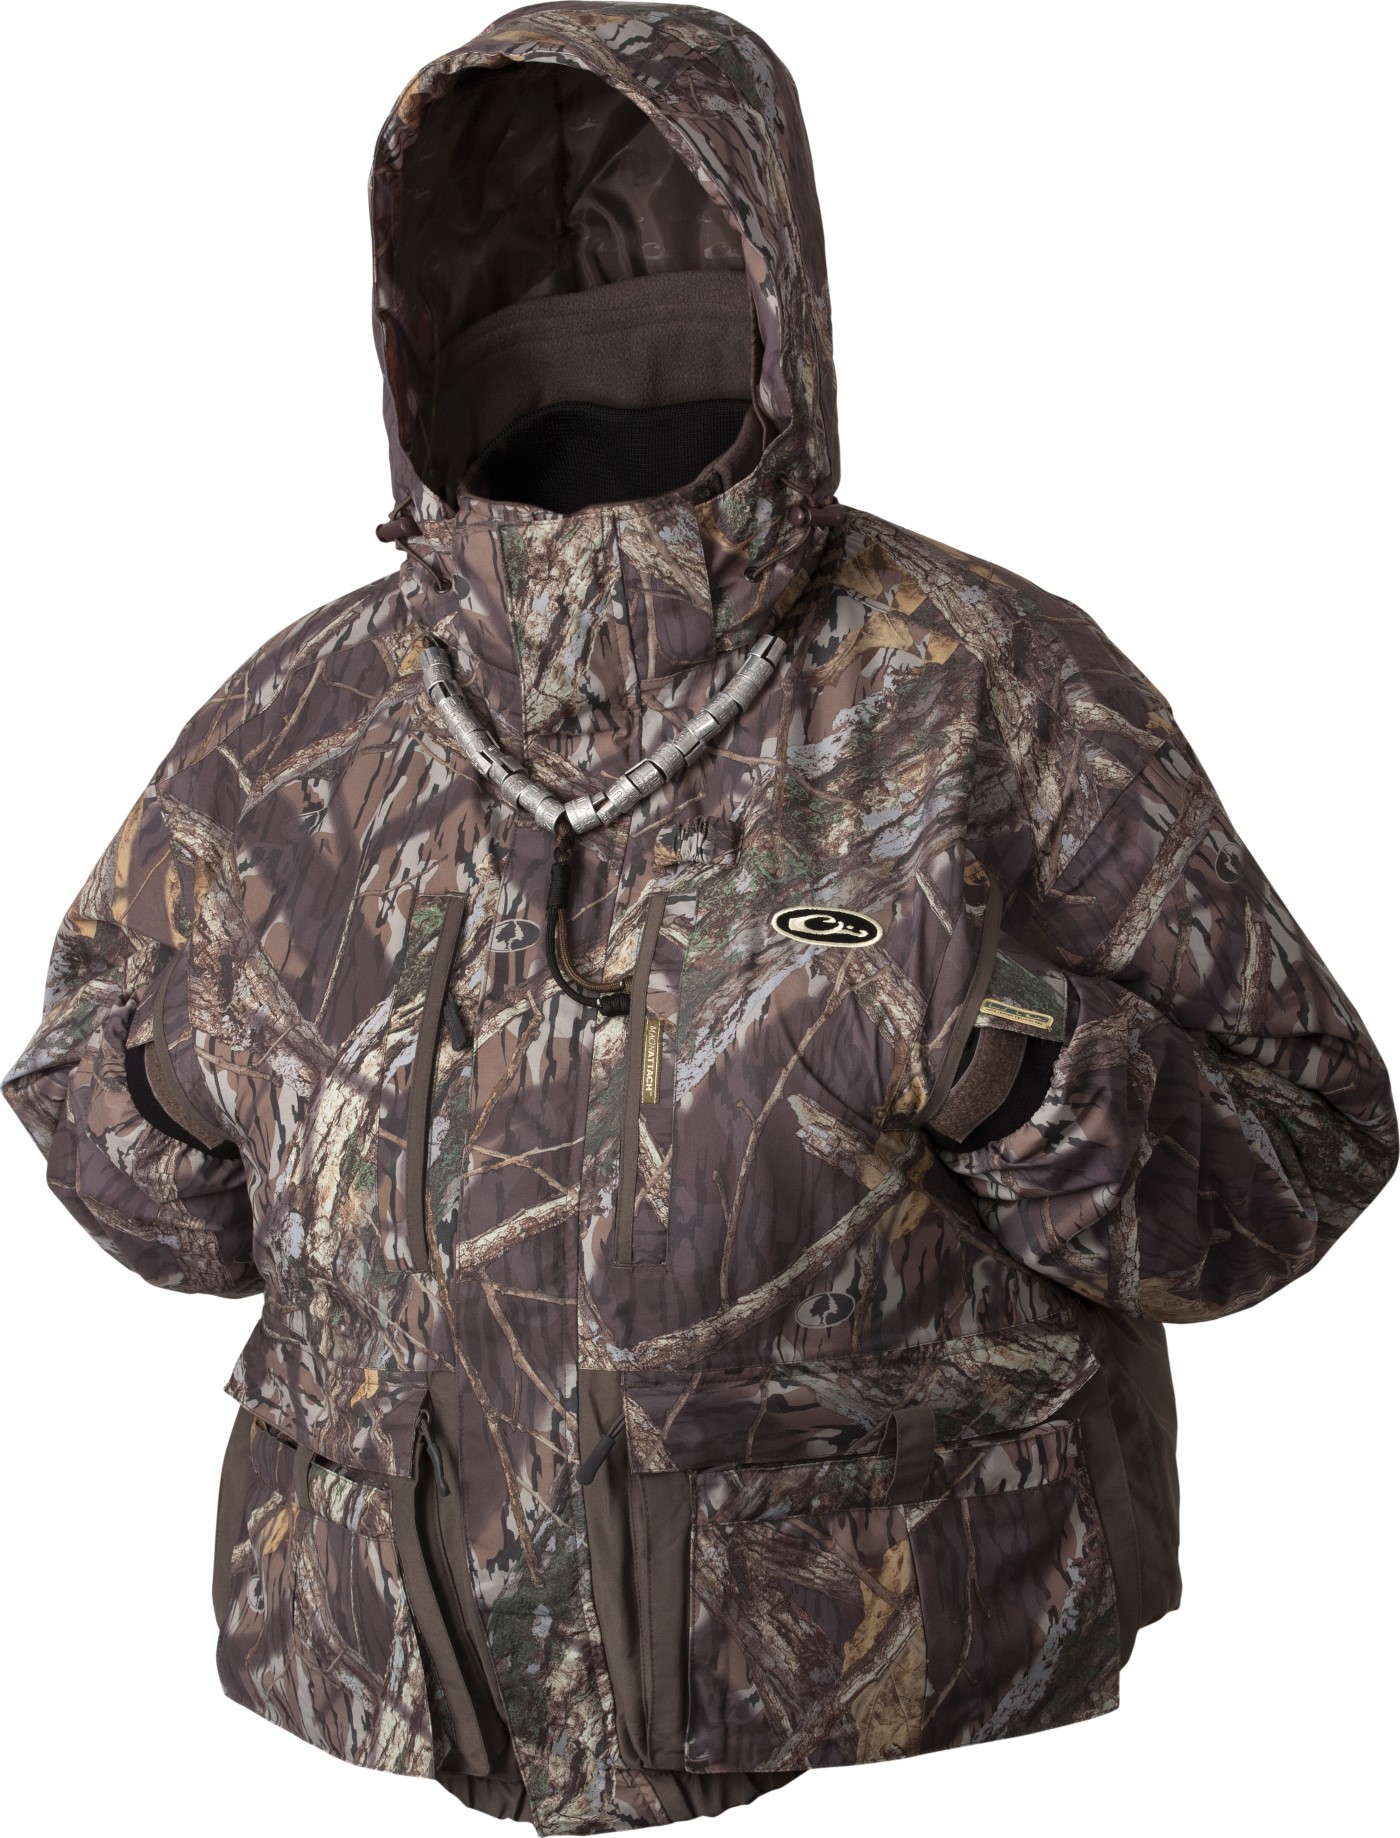 lst insulated waterfowler's jacket 2.0